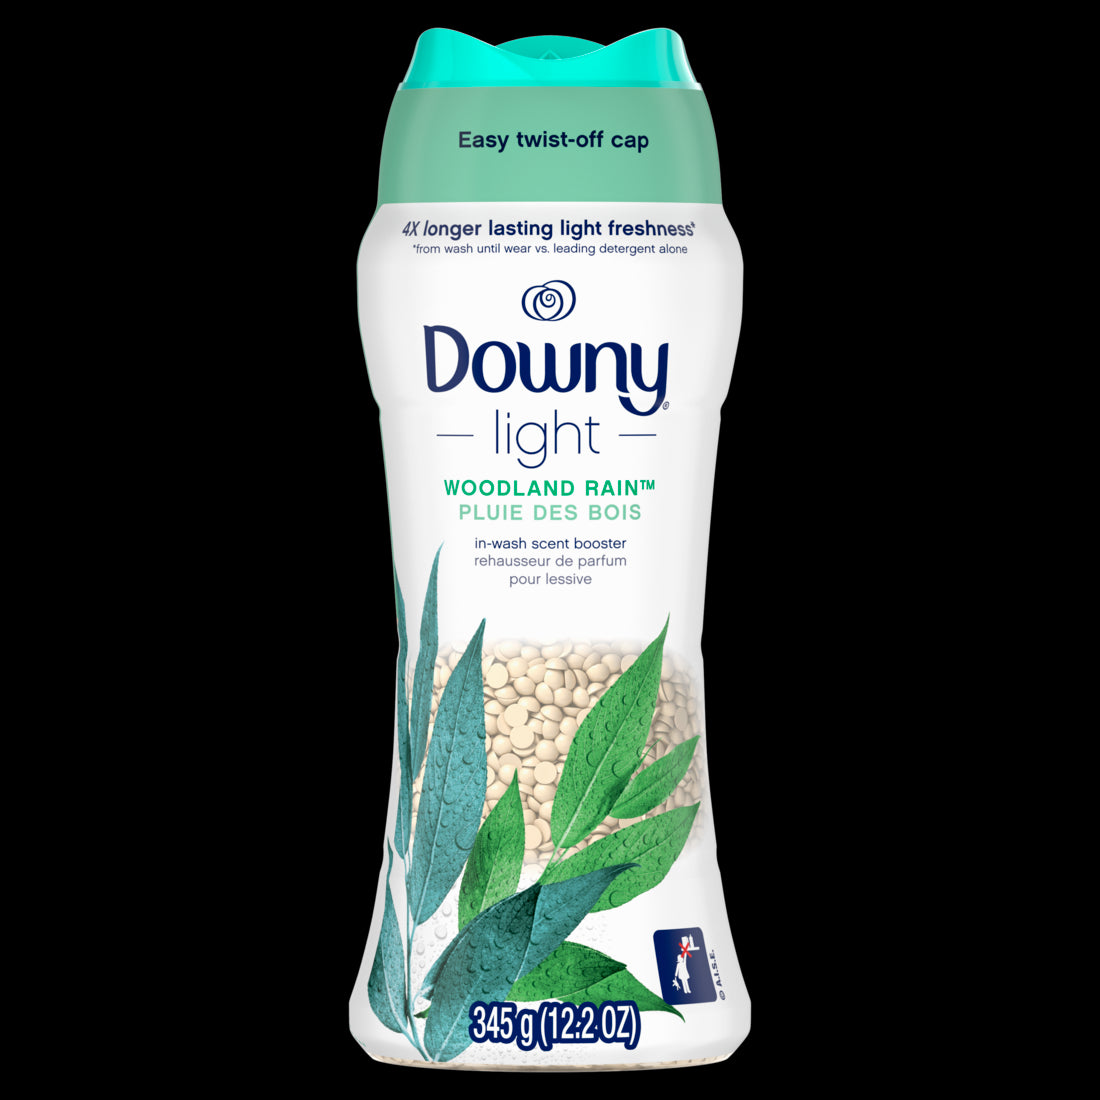 Downy Light Laundry Scent Booster Beads for Washer Woodland Rain with No Heavy Perfumes -12.2oz/4pk